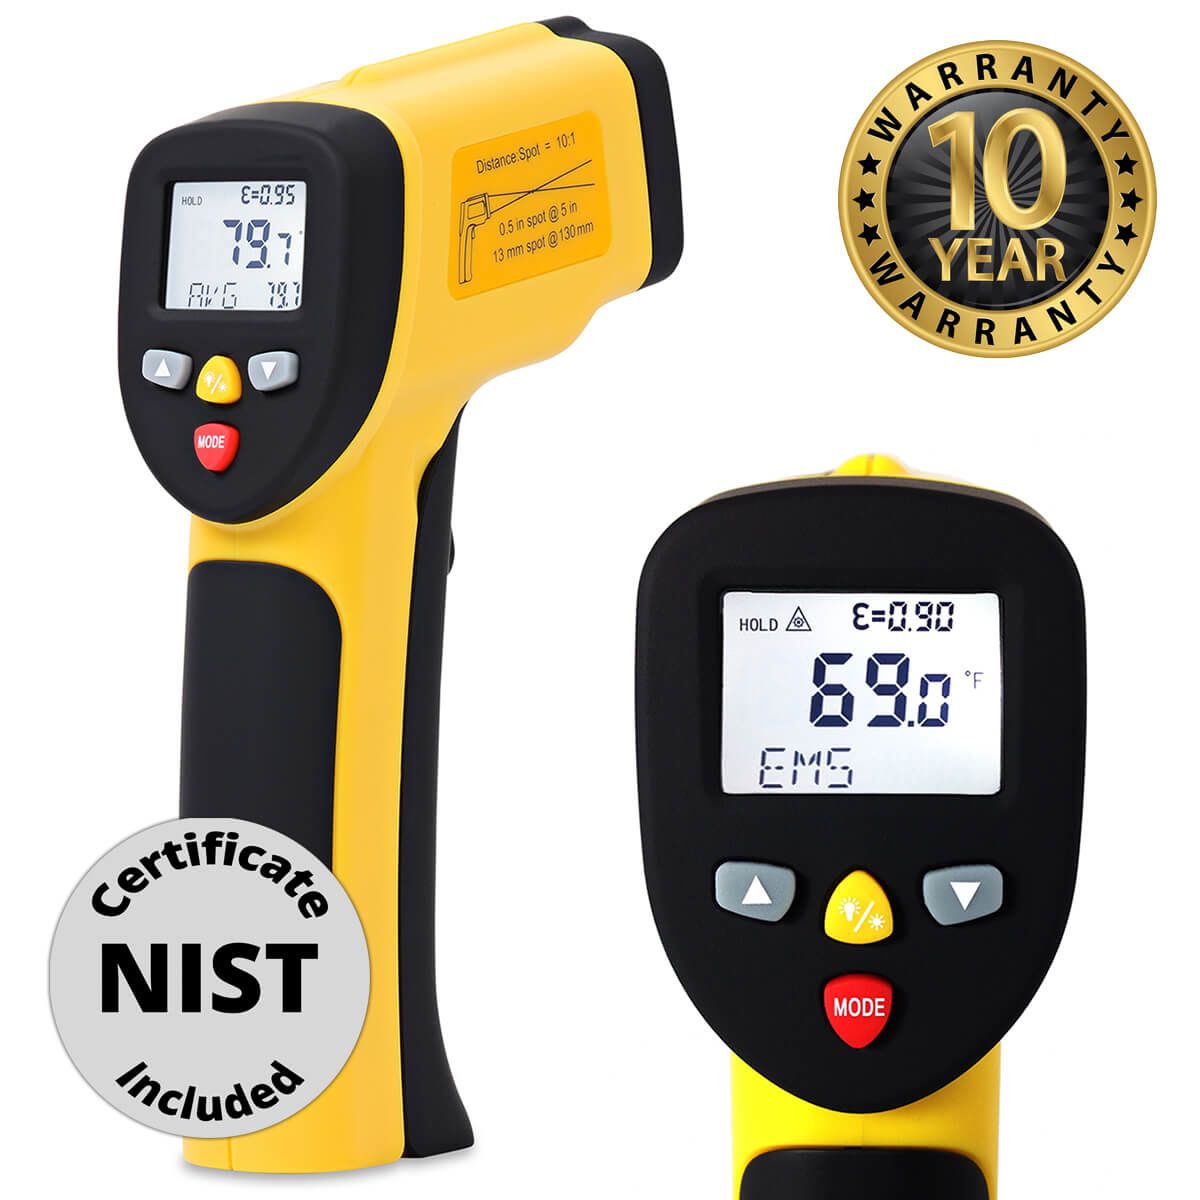 Temperature Gun by ennoLogic - Accurate High Temperature Dual Laser Infrared Thermometer -58f to 1922F - Digital Surface IR Thermometer eT1050D